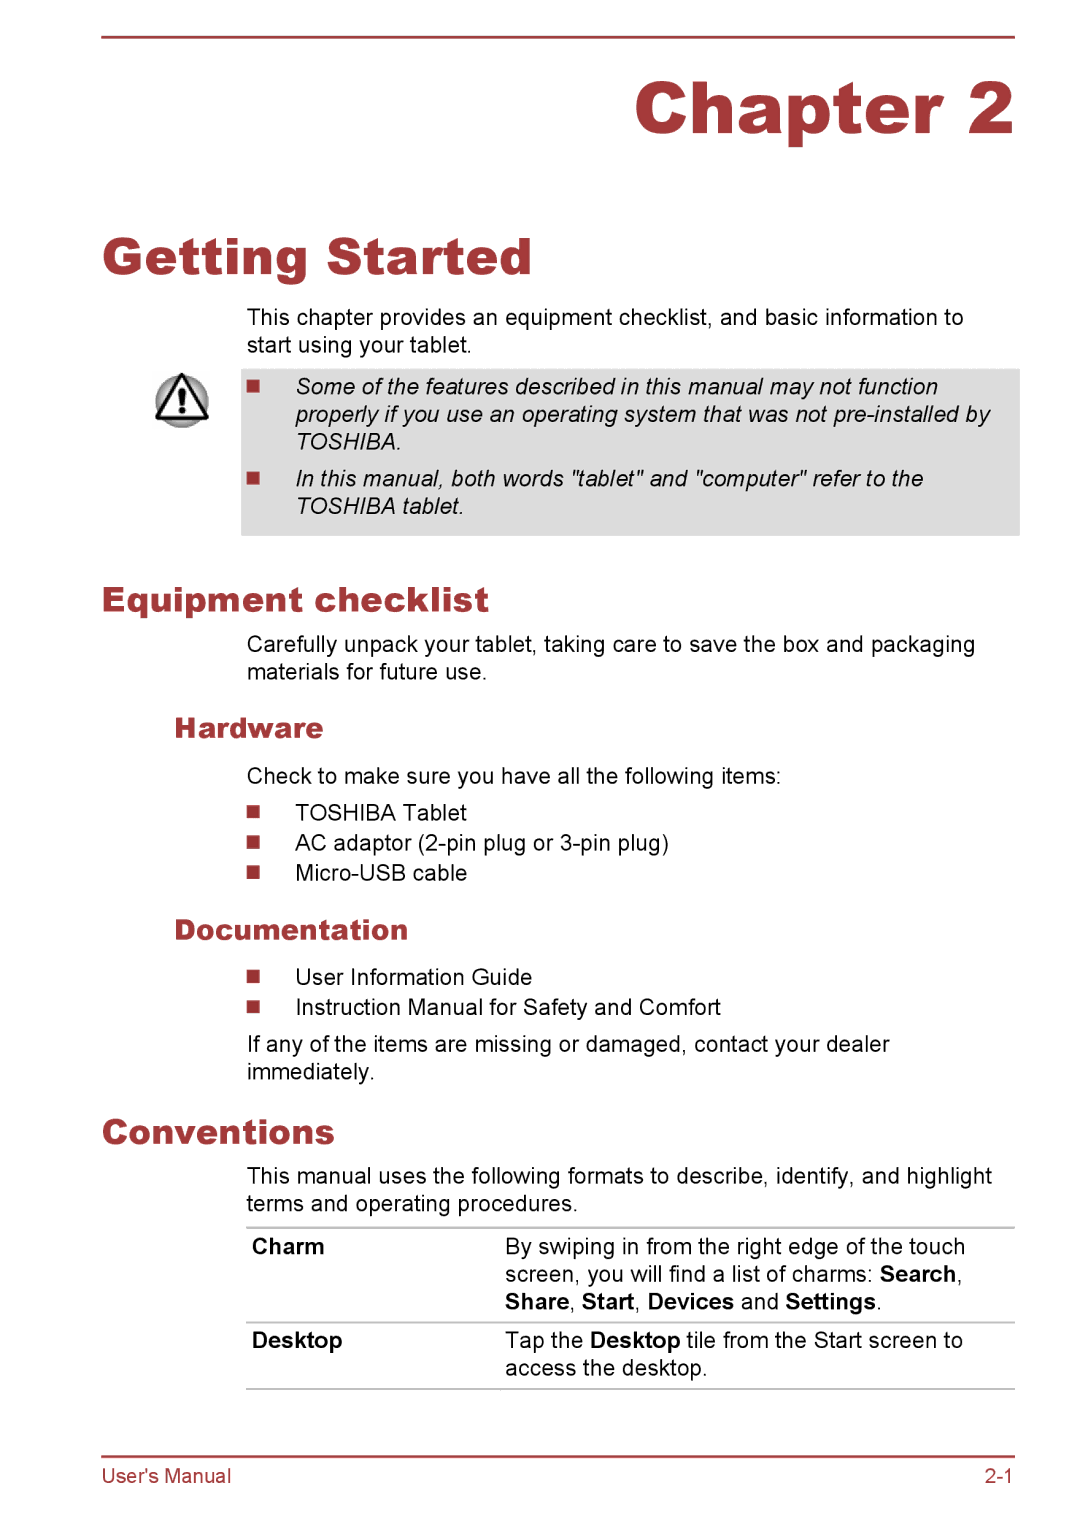 Toshiba WT8-A Series user manual Getting Started, Equipment checklist, Conventions, Hardware, Documentation 